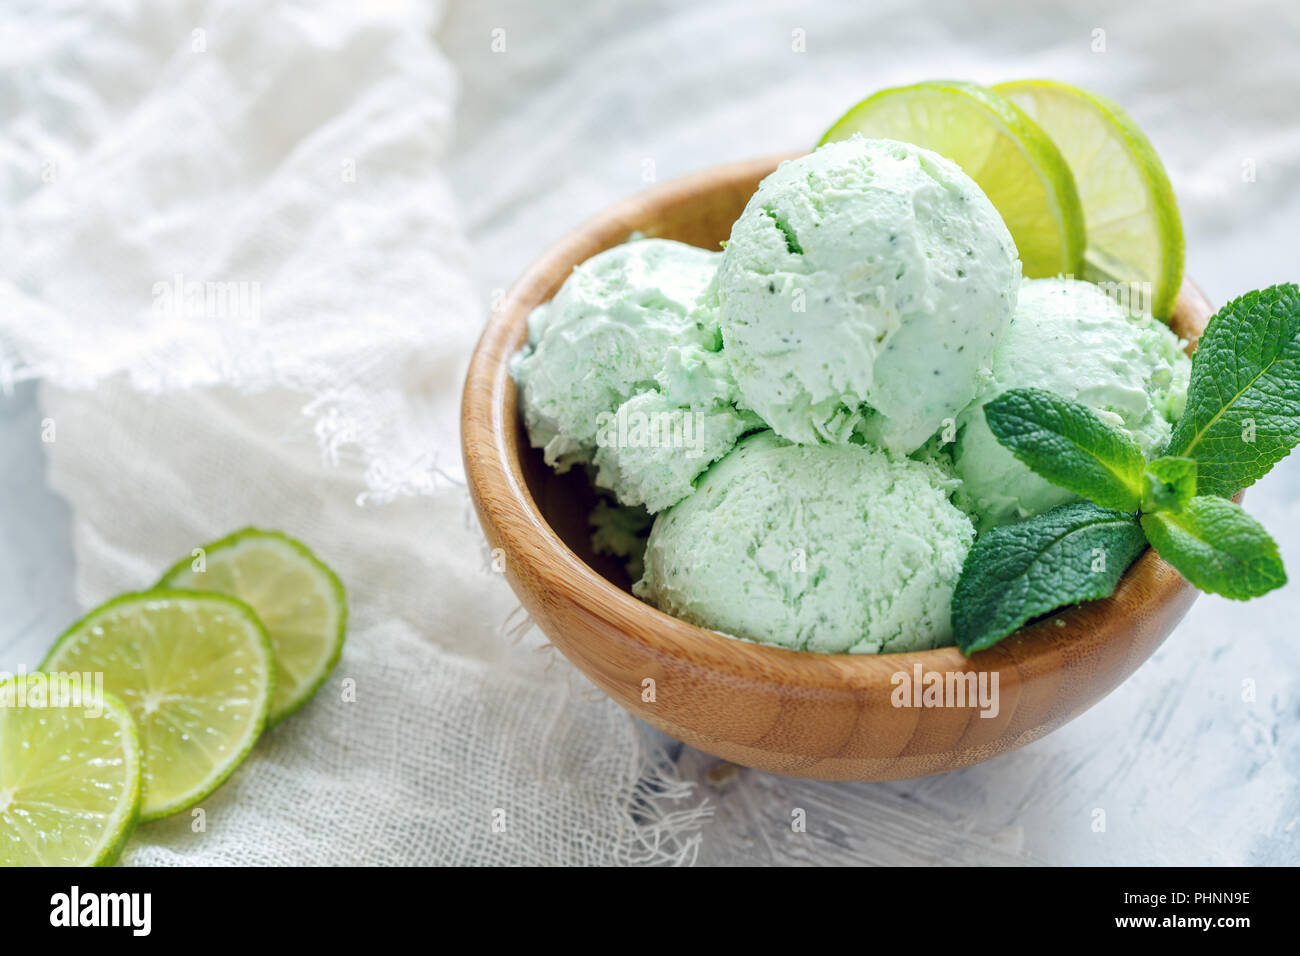 Mojito ice cream with lime slices and mint sprigs. Stock Photo